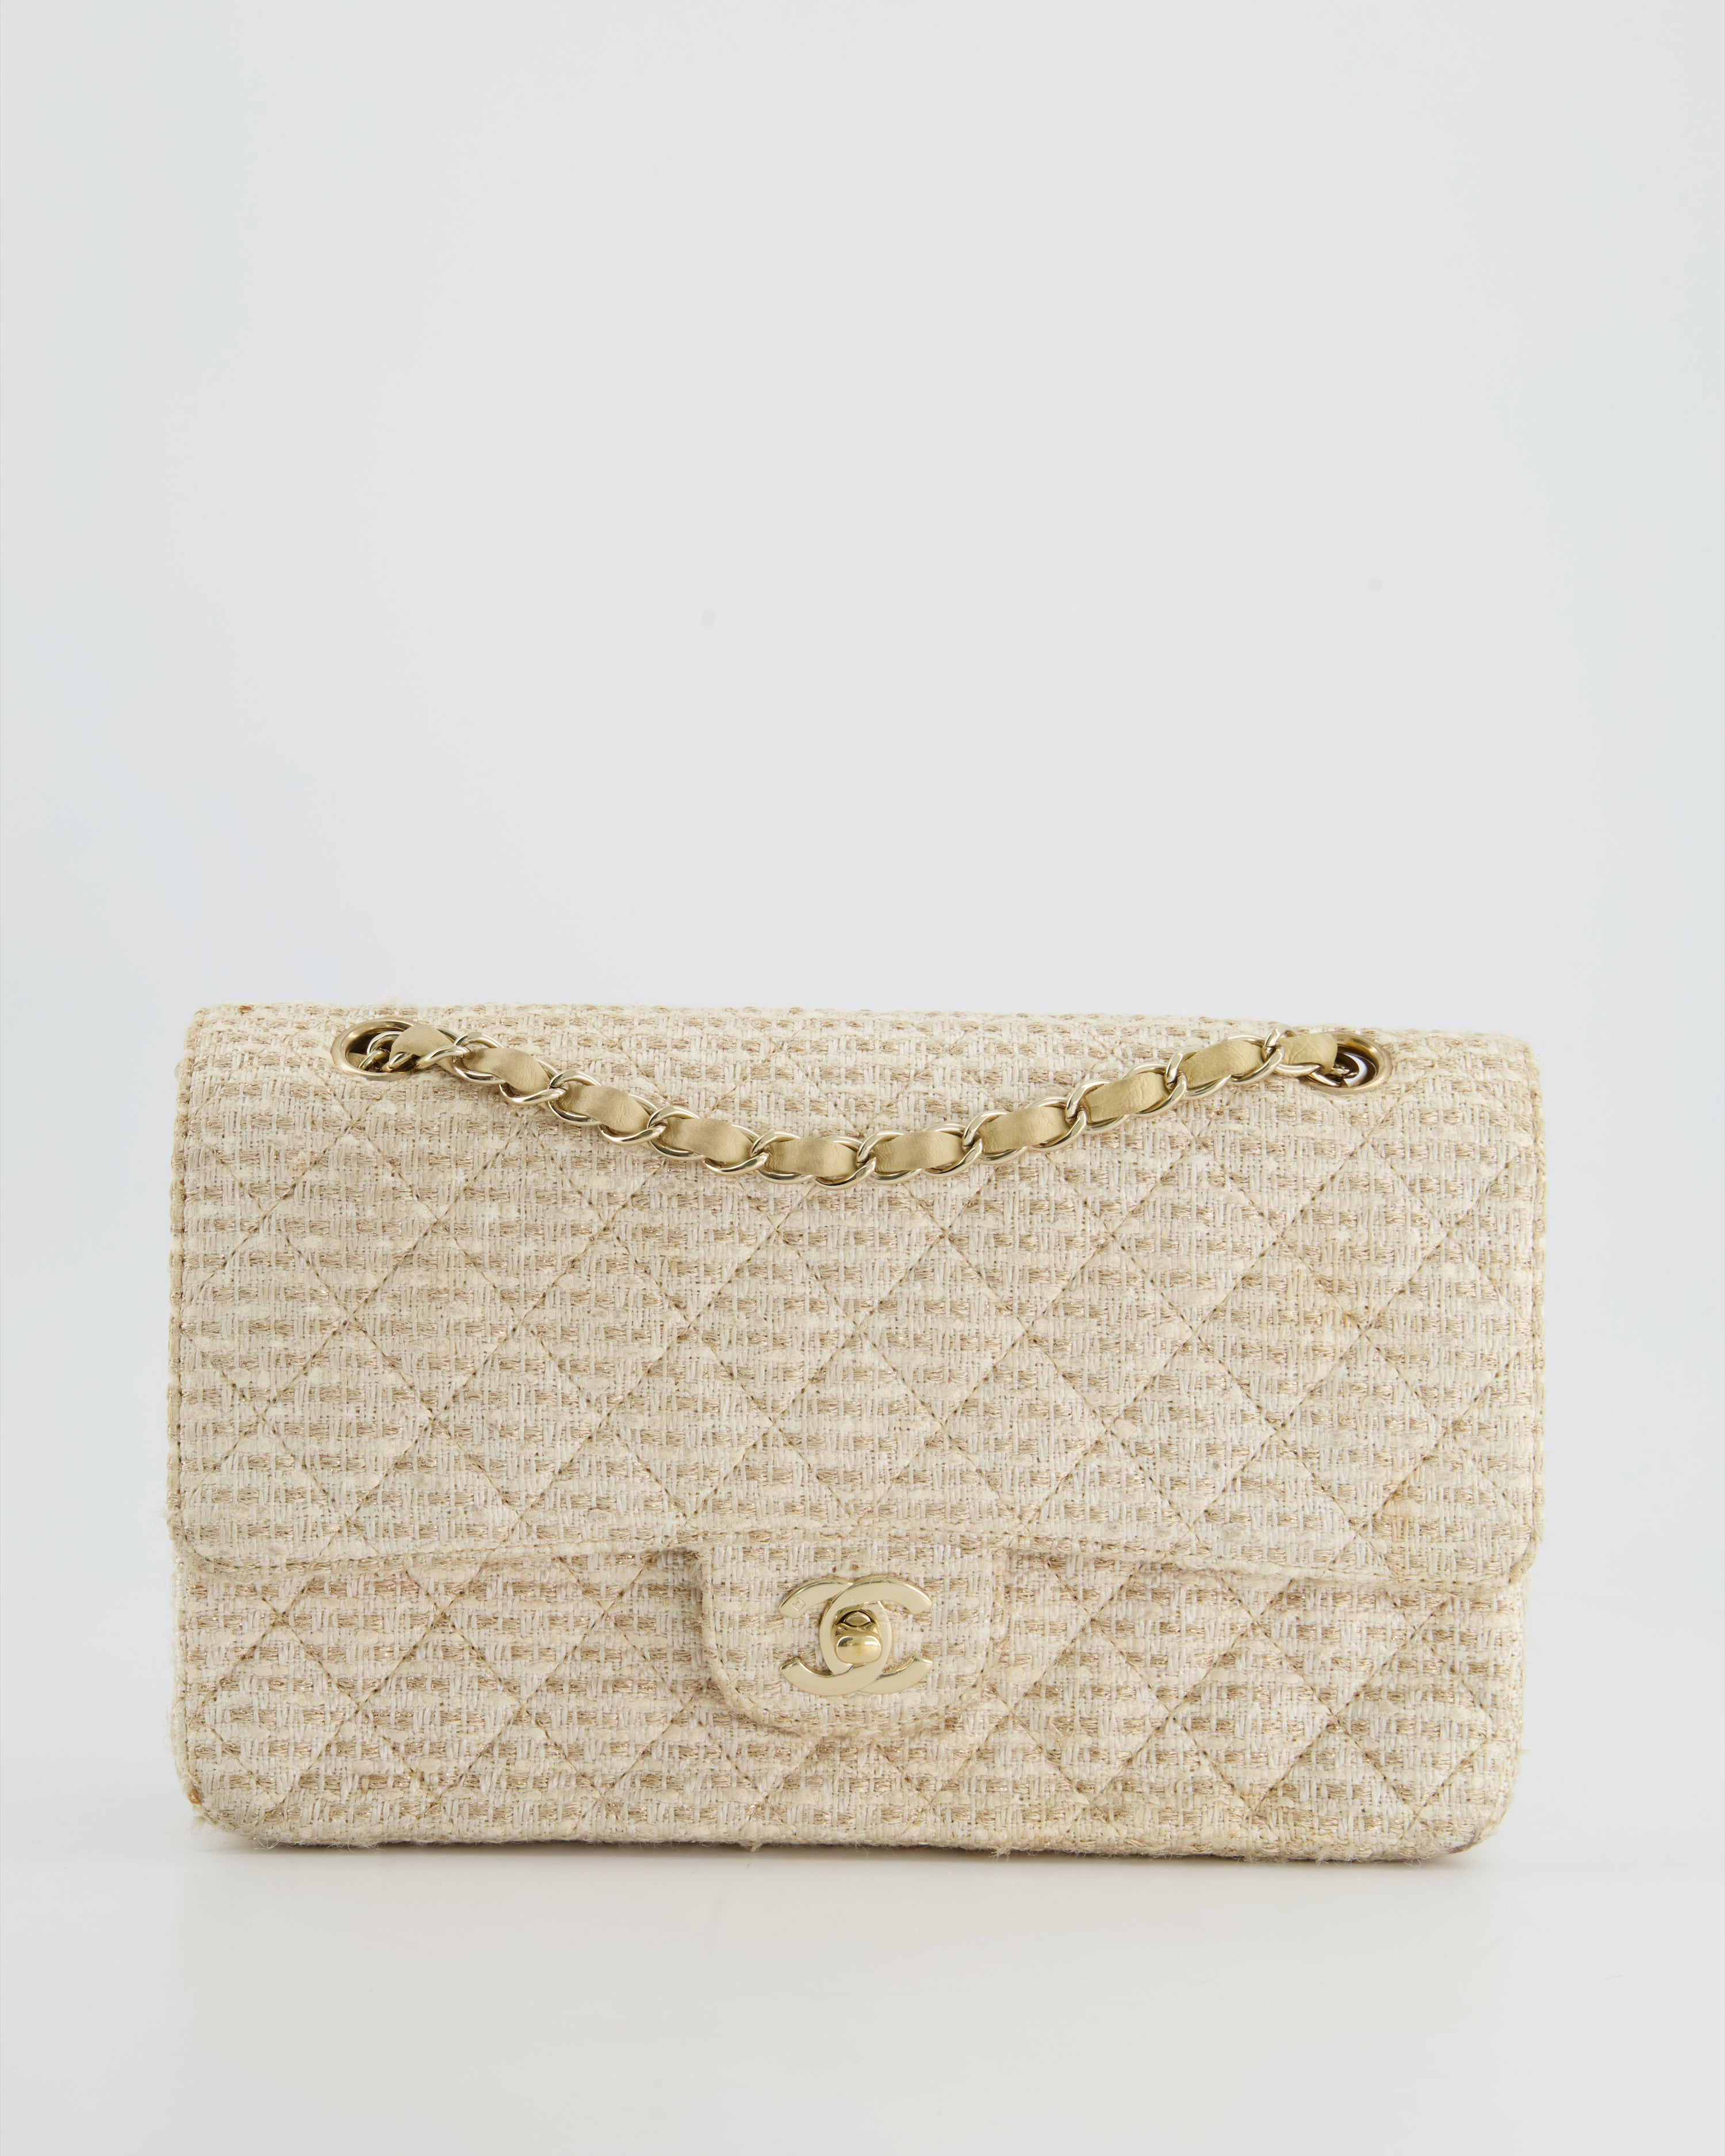 Chanel Medium Classic Double Flap Bag in Beige and Gold Tweed